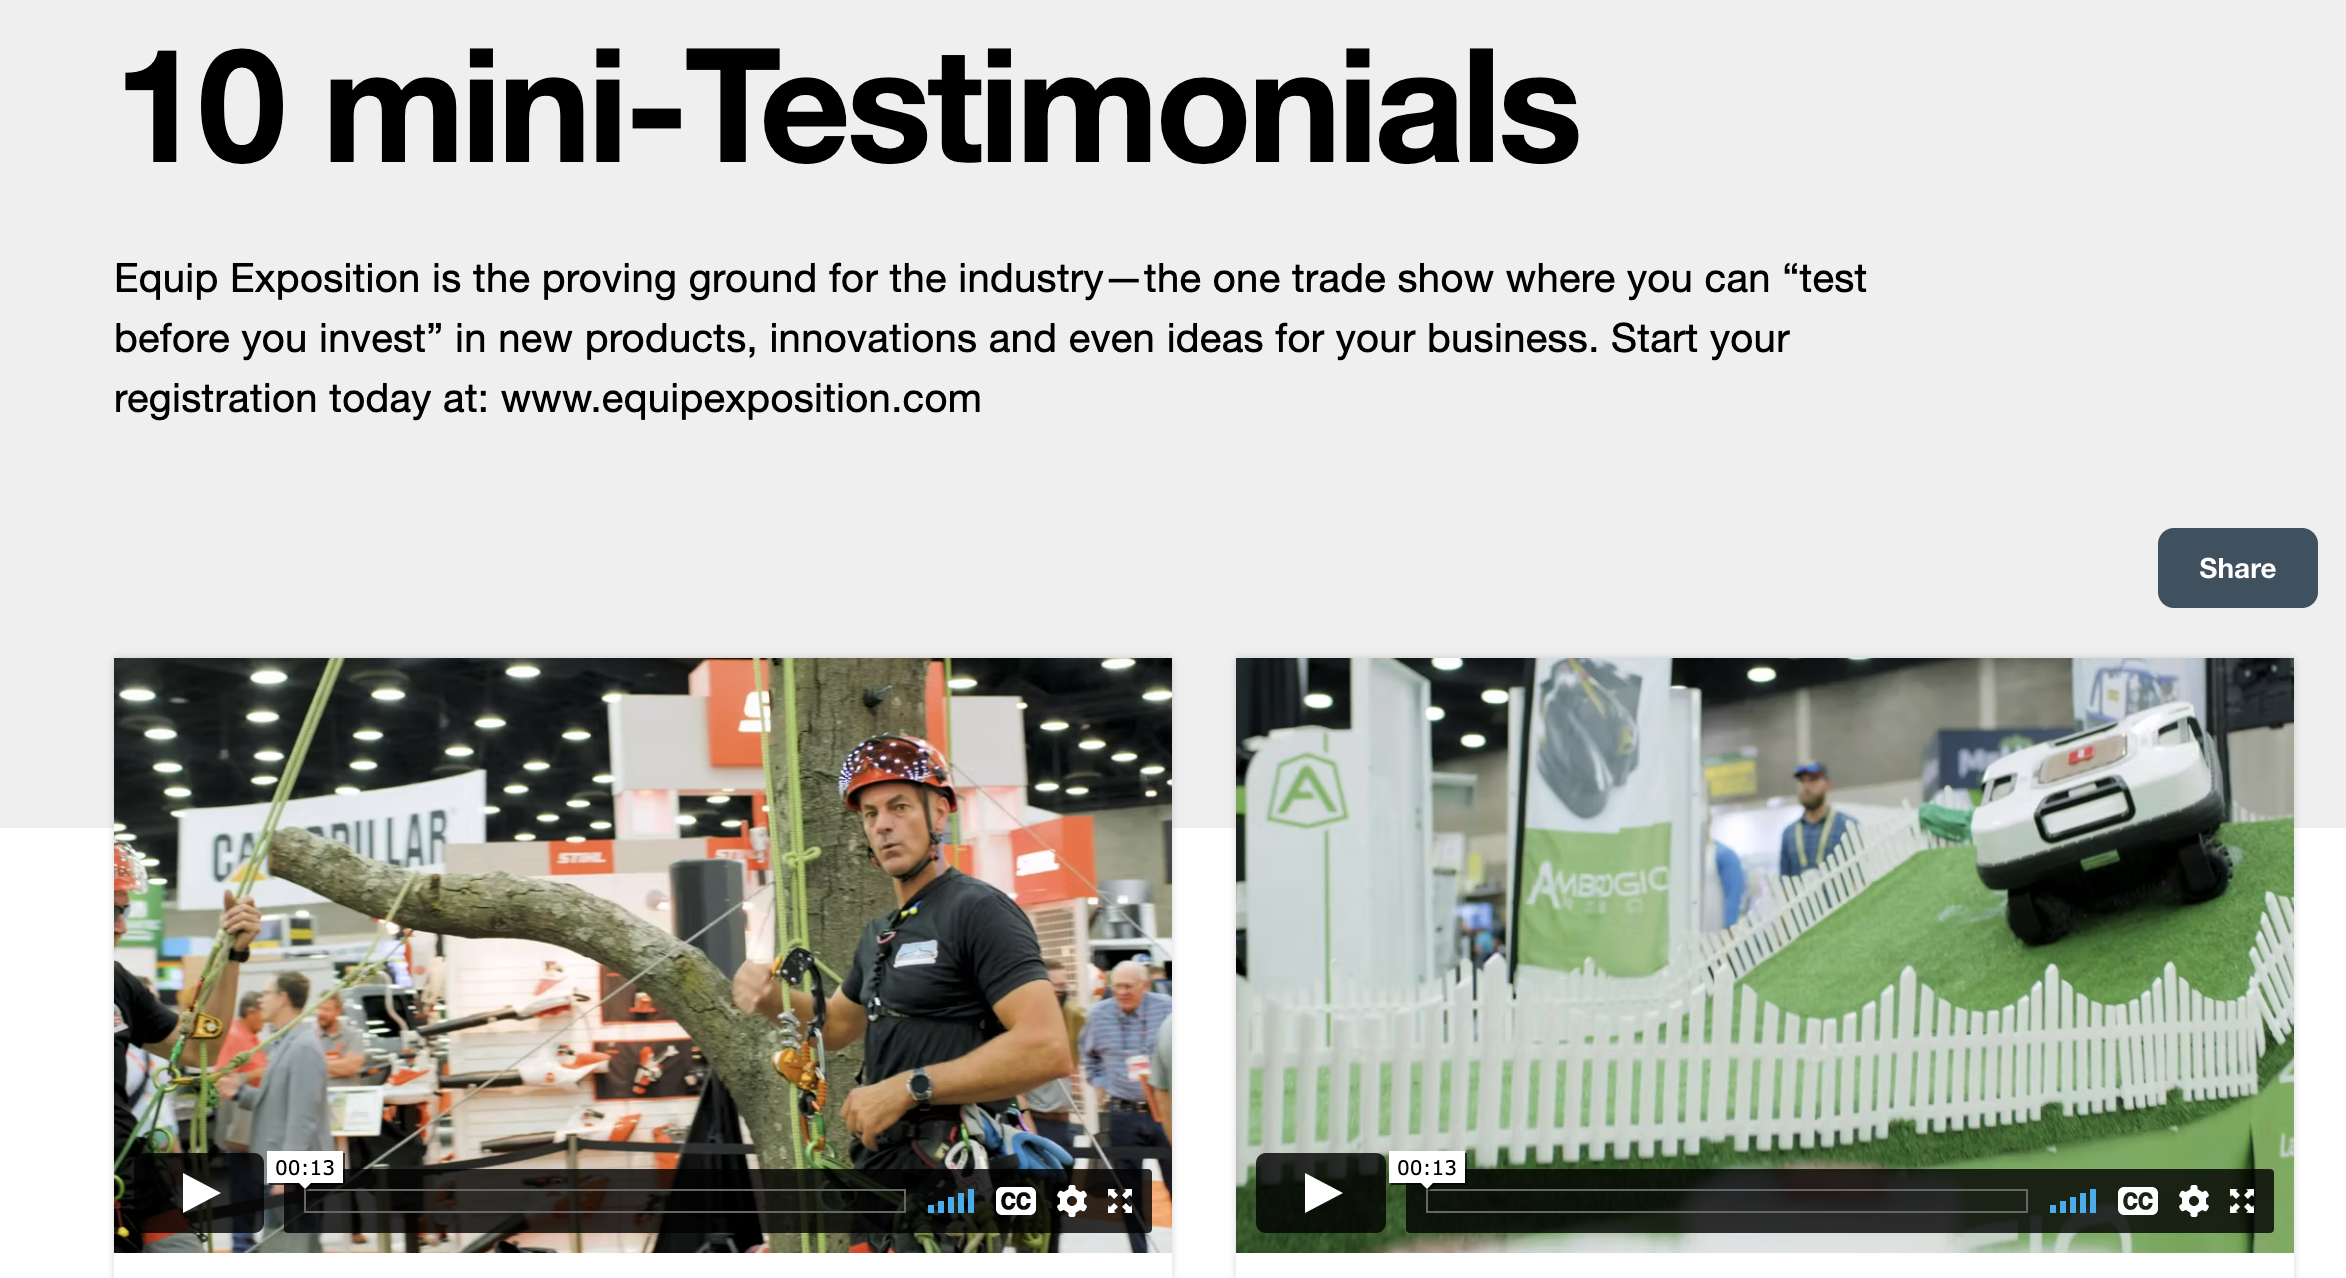 Equip Exposition is the proving ground for the industry—the one trade show where you can “test before you invest” in new products, innovations and even ideas for your business. Start your registration today at: www.equipexposition.com